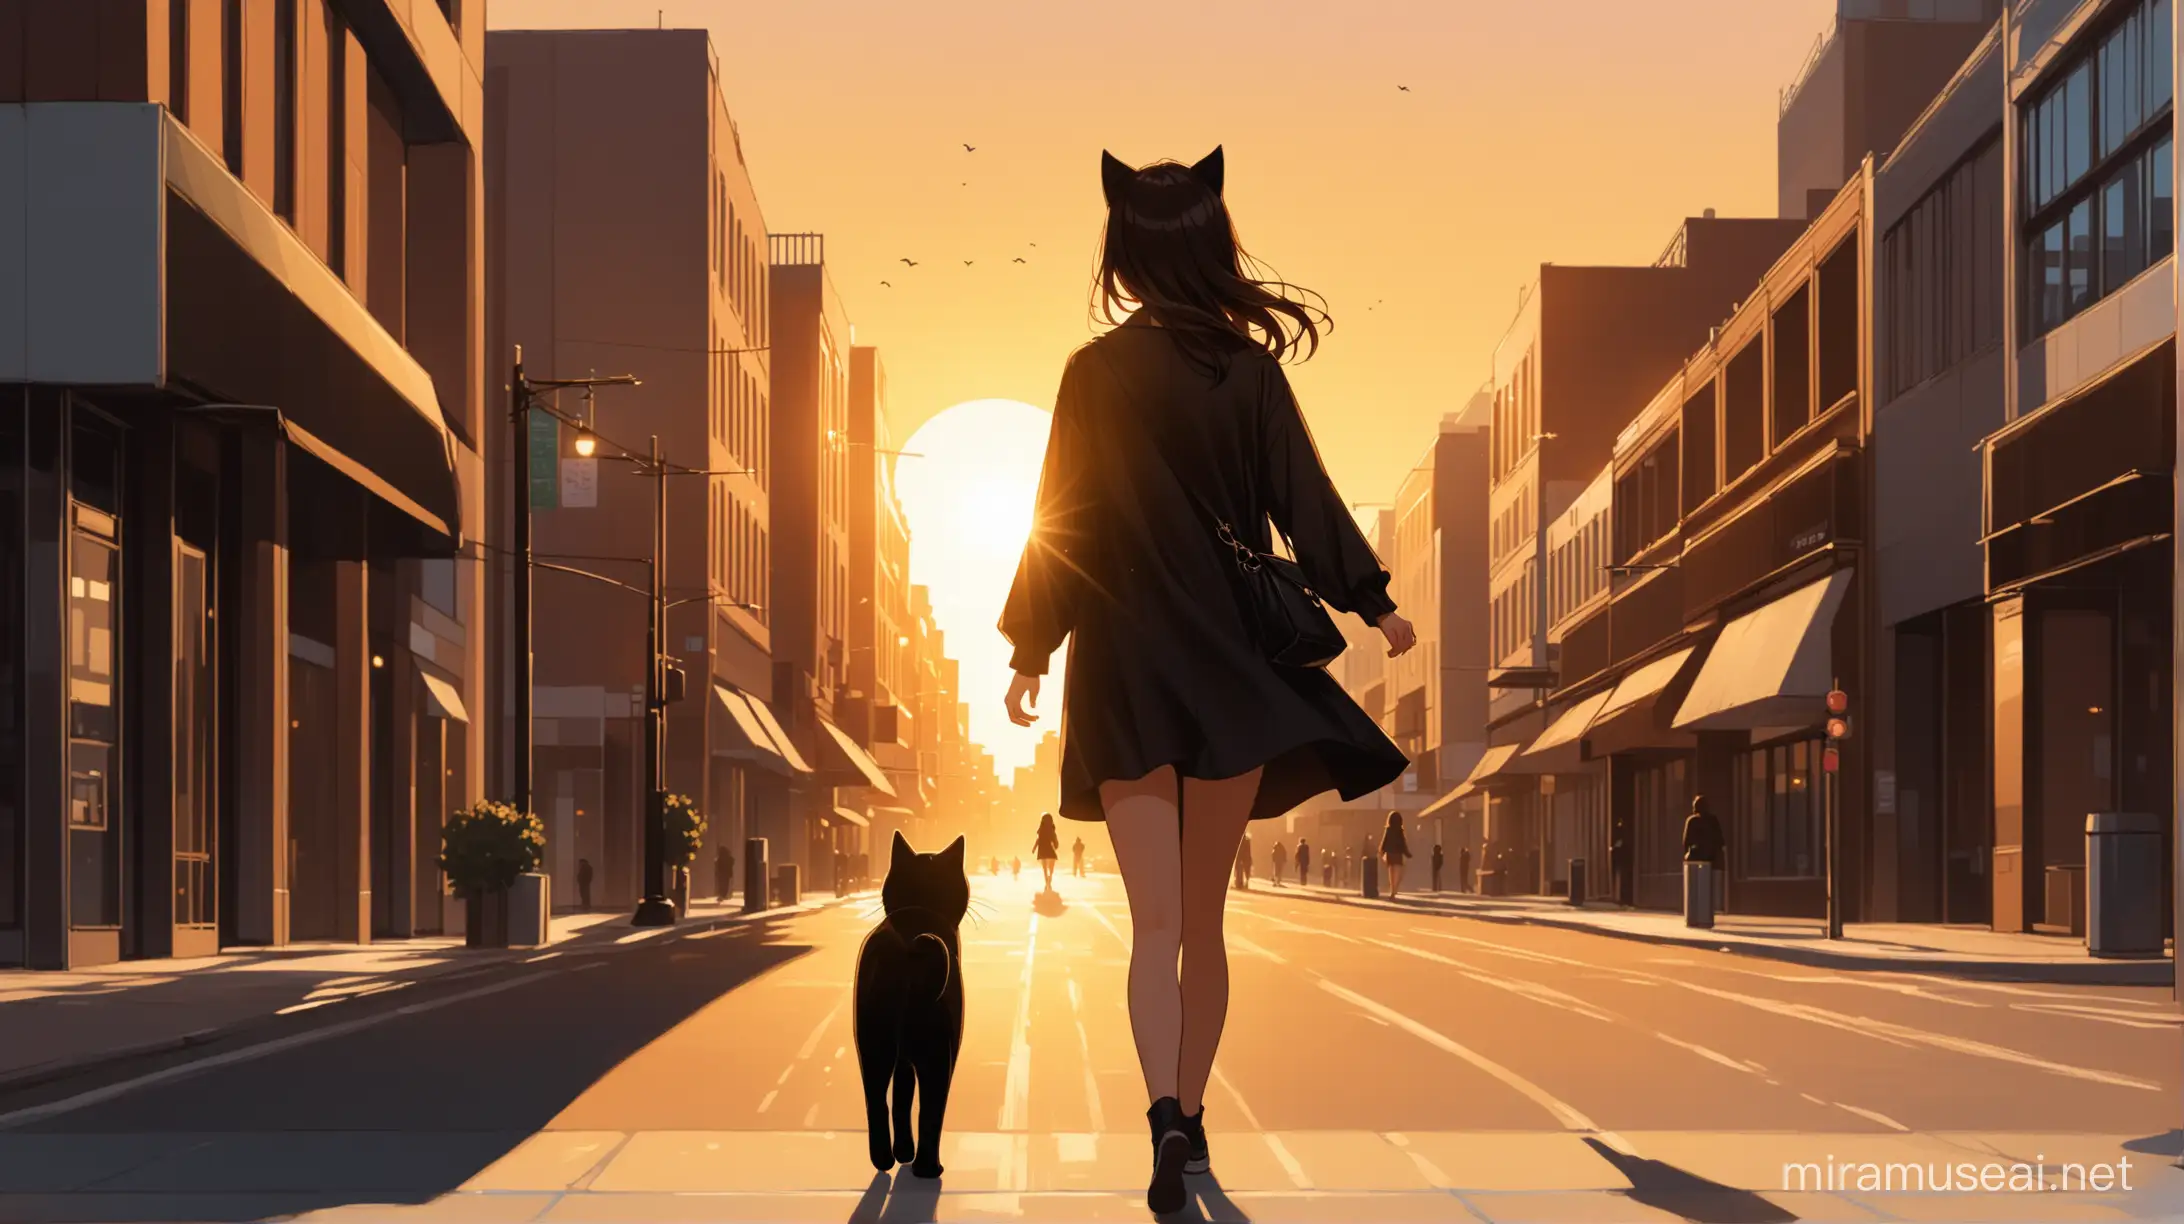 /image a girl walking in downtown in golden hour, a black cat with her